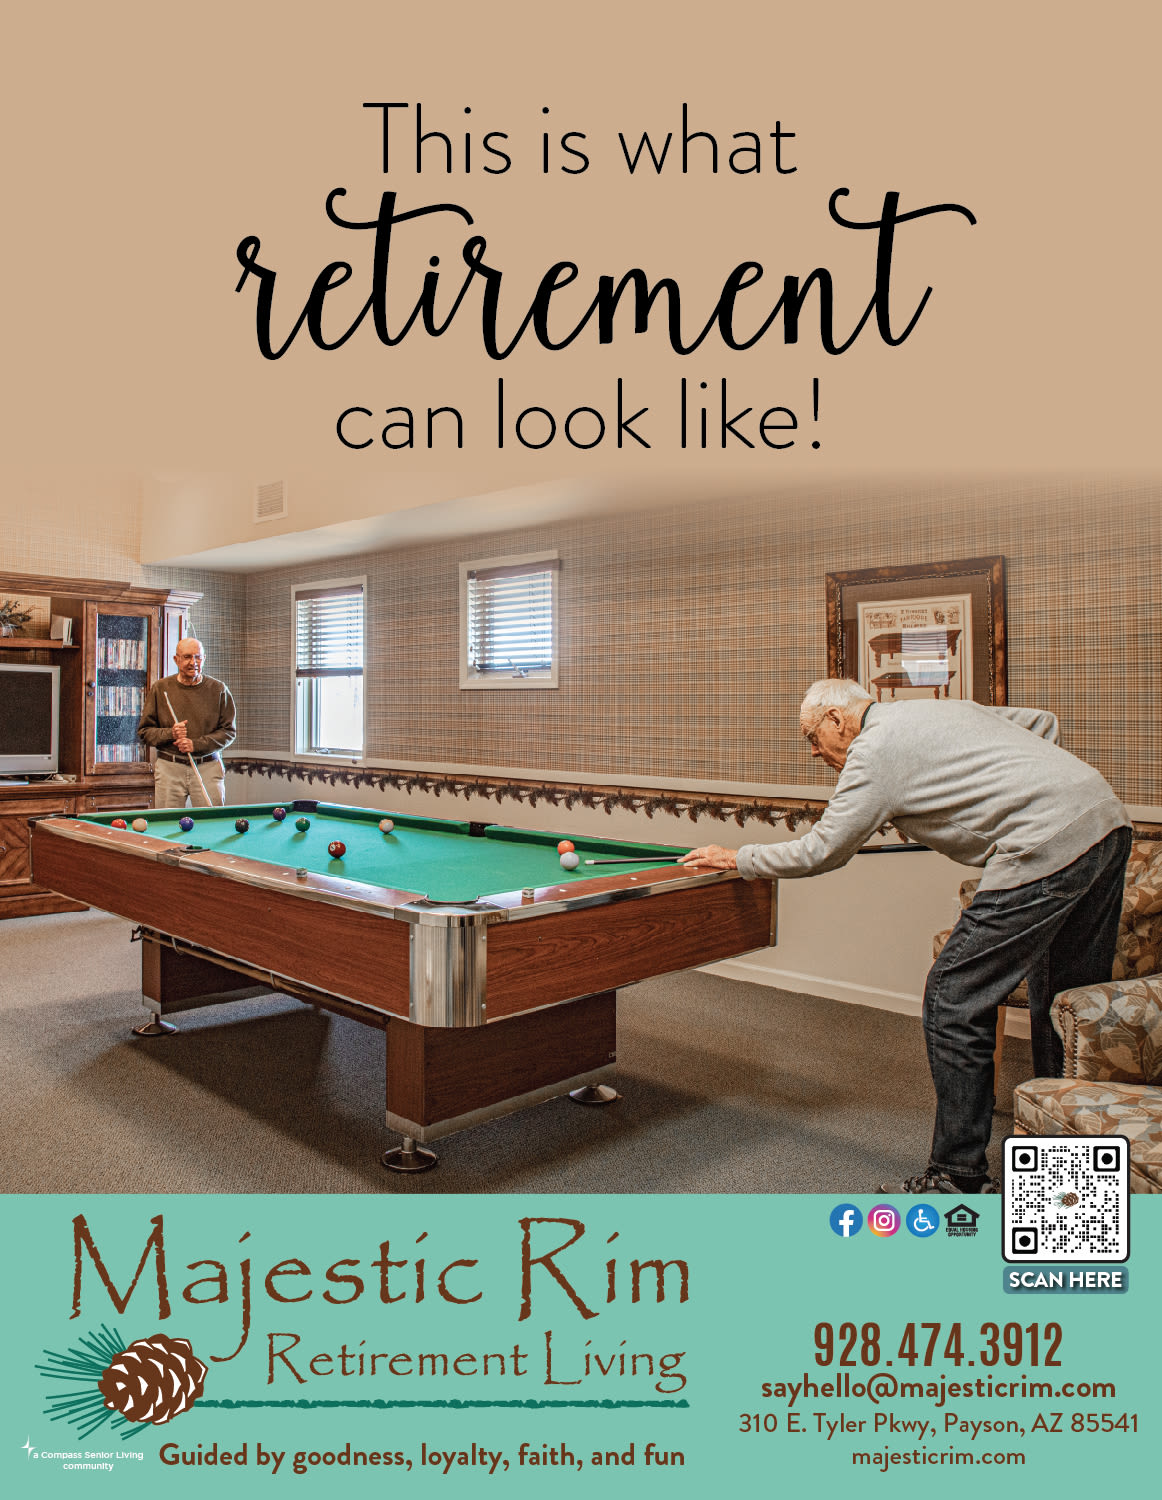  Move In Flyer at Majestic Rim Retirement Living in Payson, Arizona  